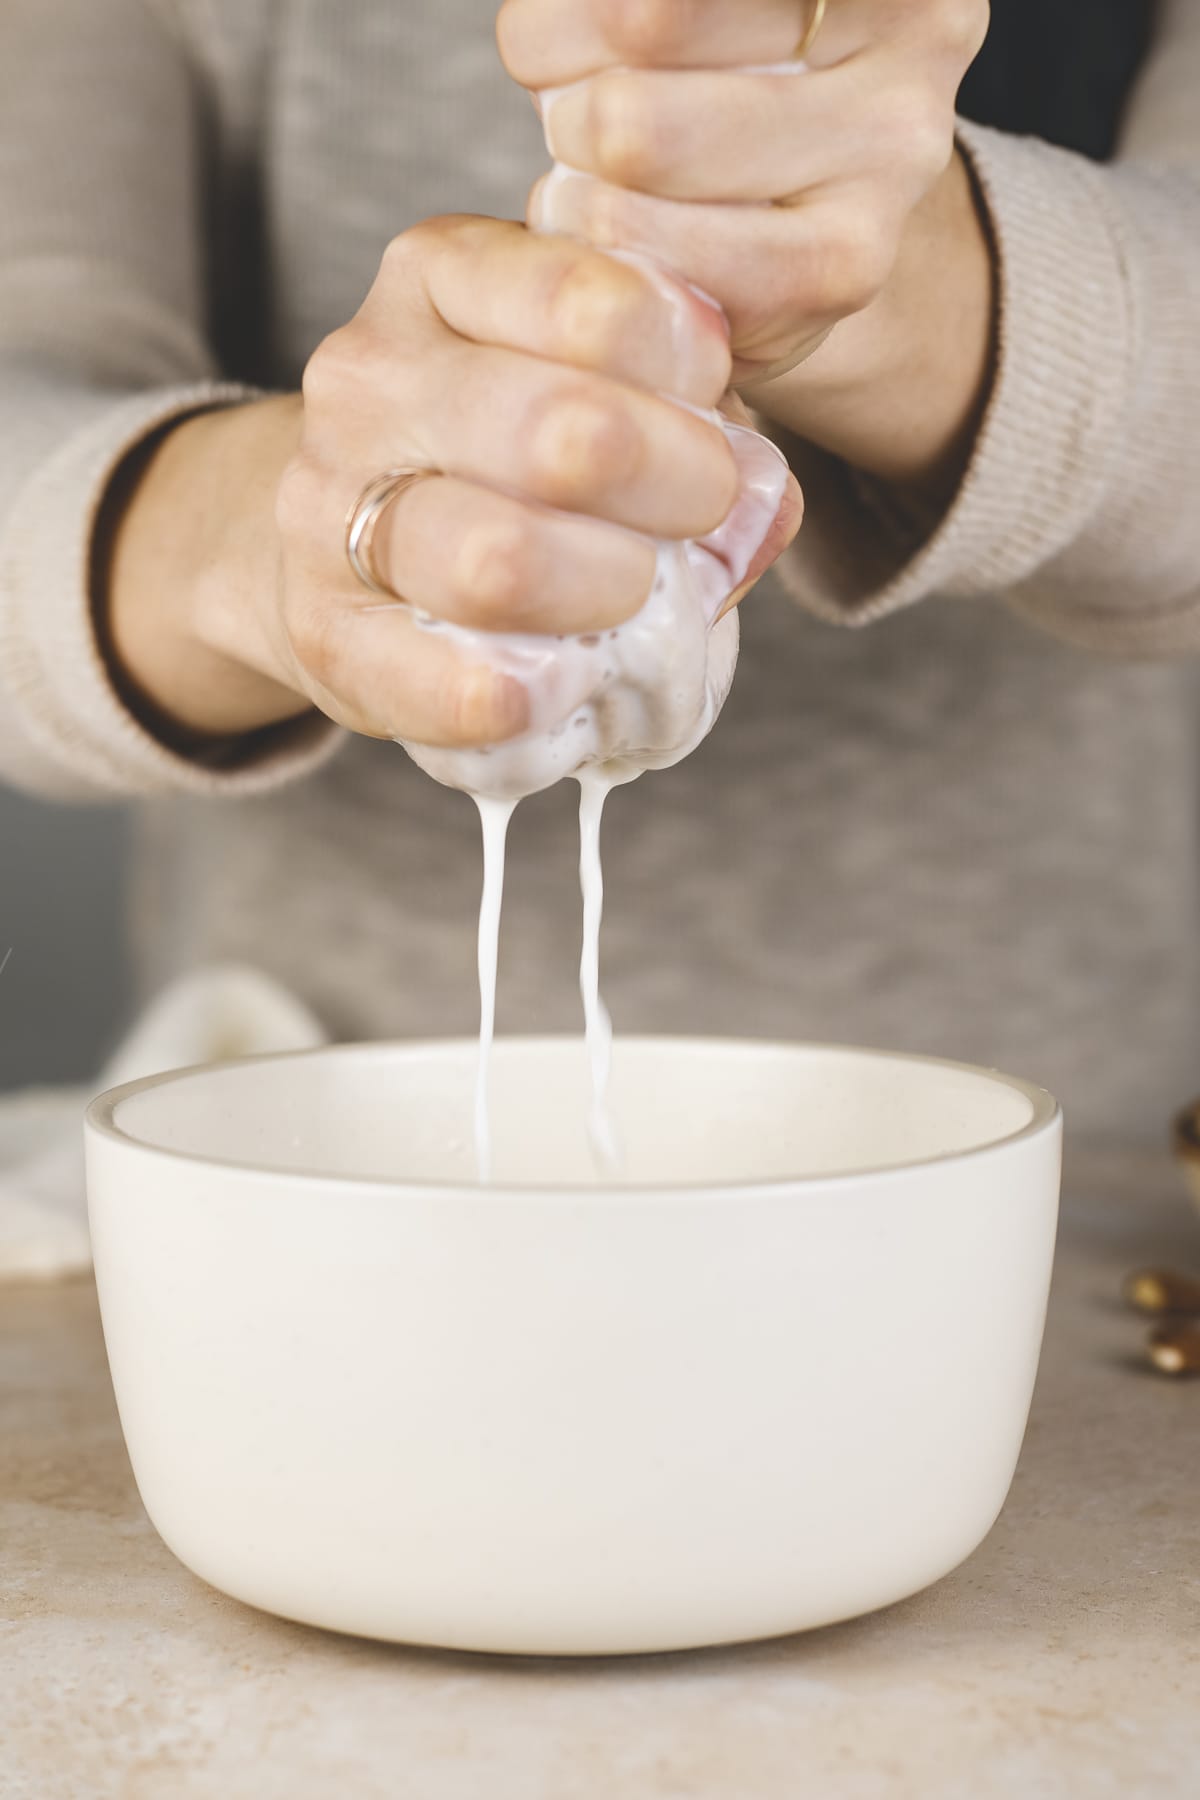 Almond Milk being squeezed through a nut milk bag into a bowl.